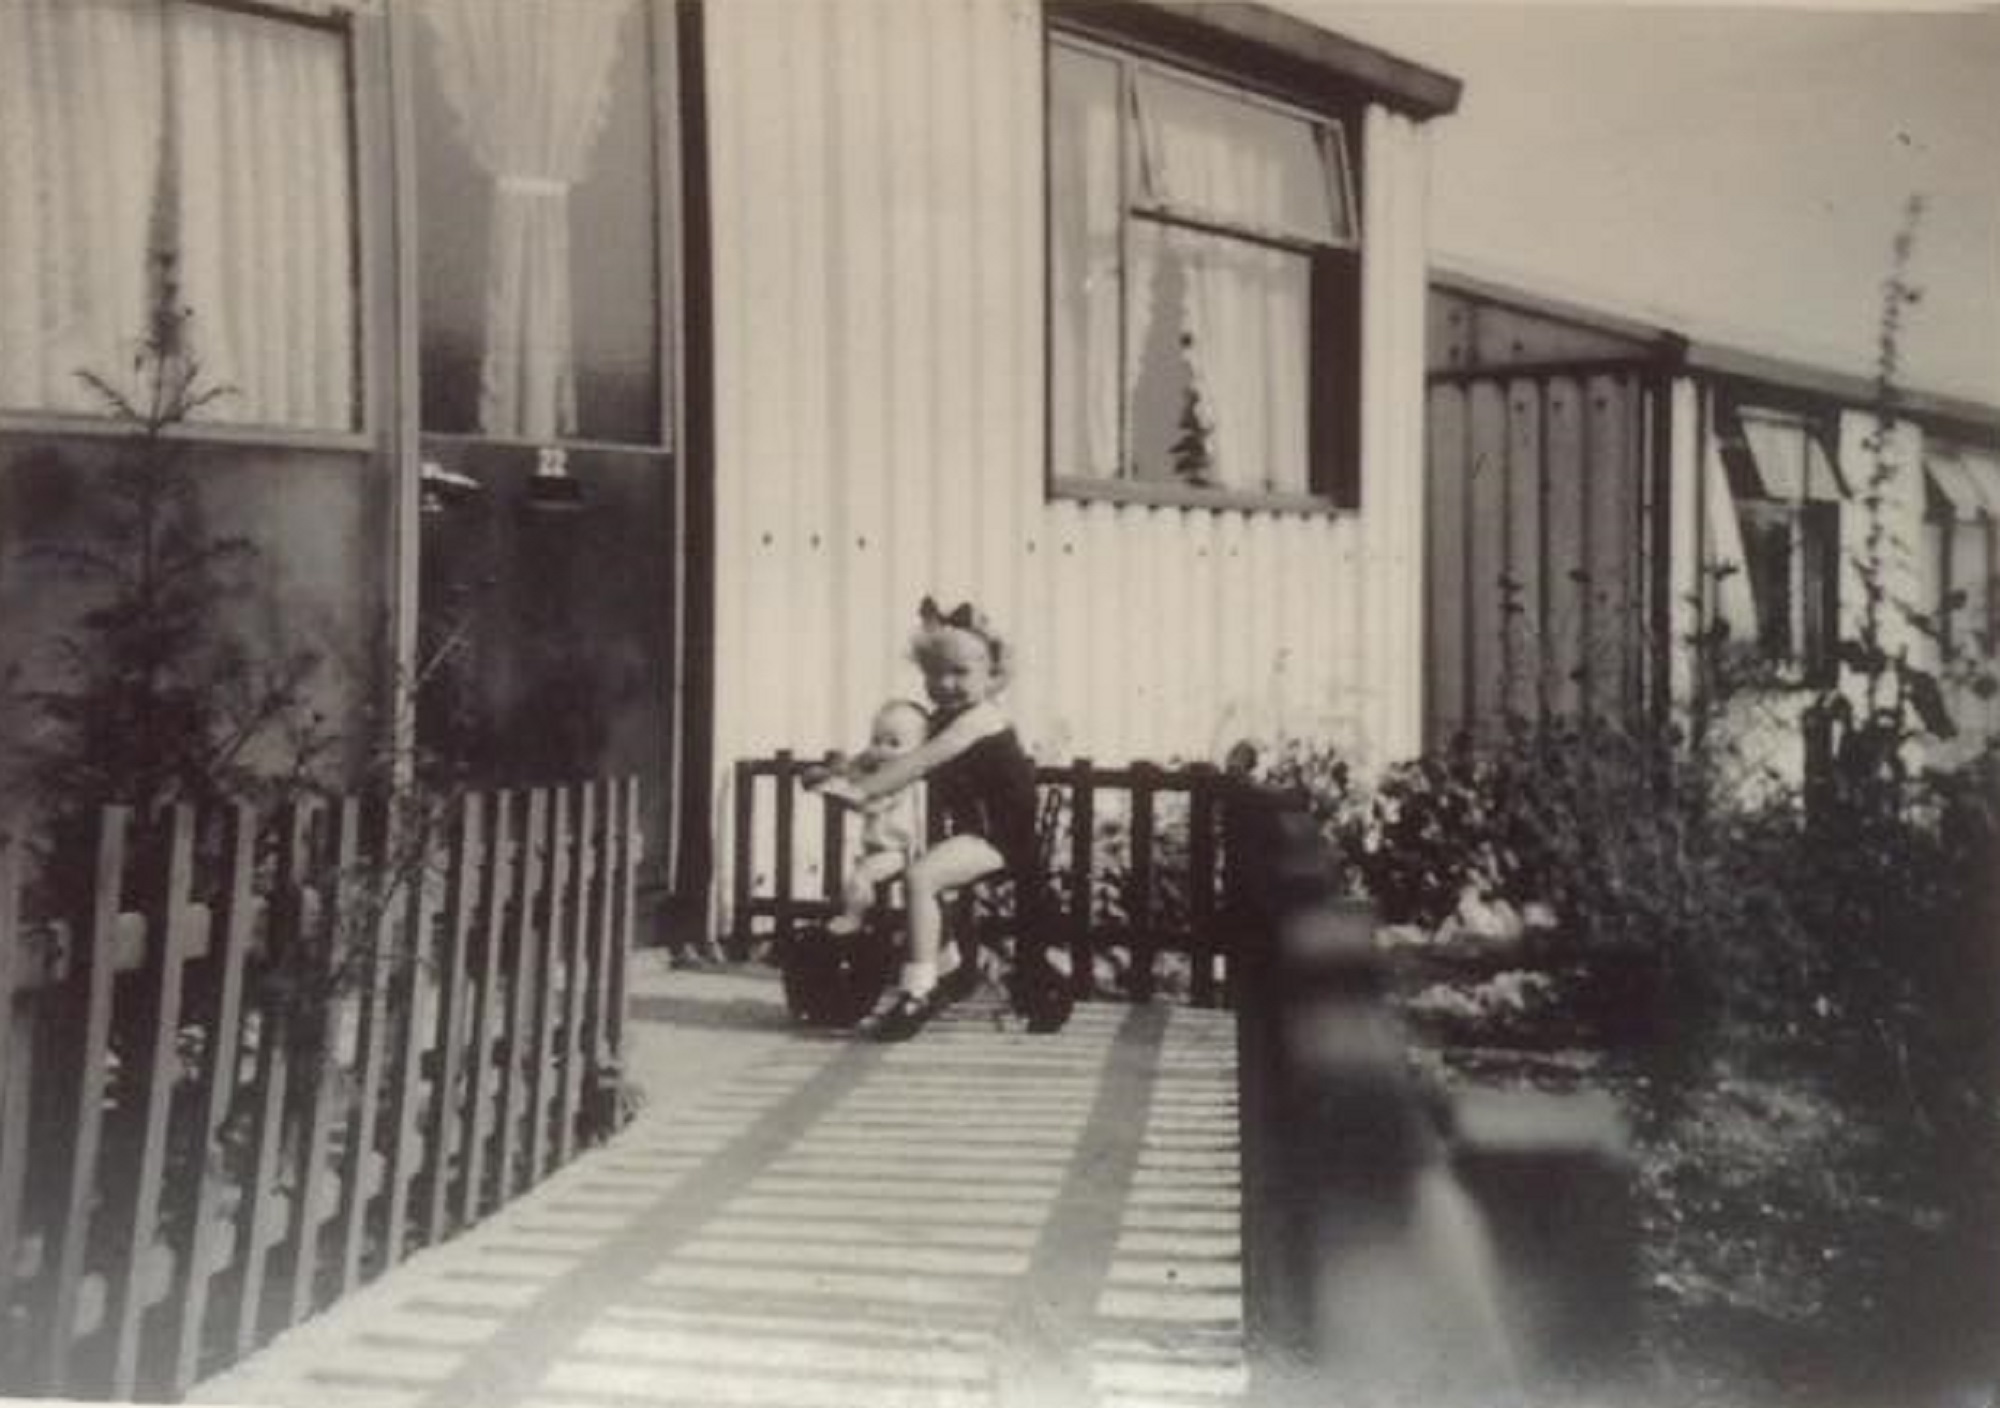 Denise with her dolly and tricycle. Oakwood Hill, Loughton, Essex